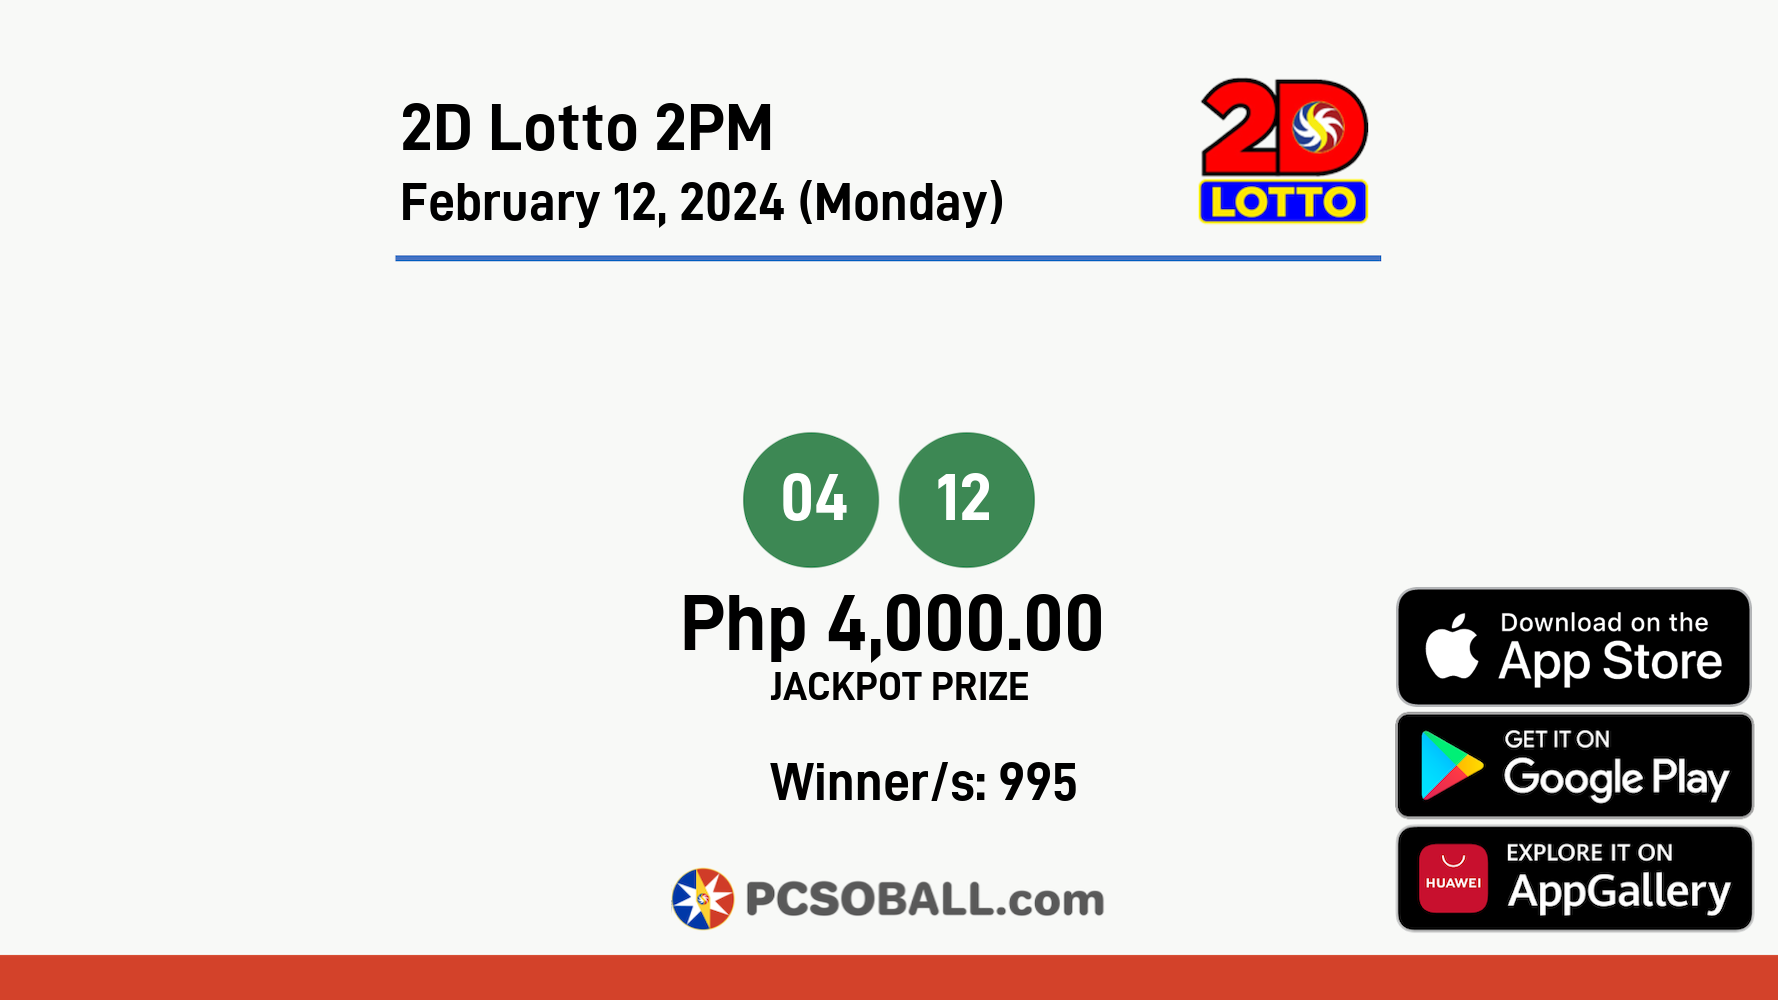 2D Lotto 2PM February 12, 2024 (Monday) Result